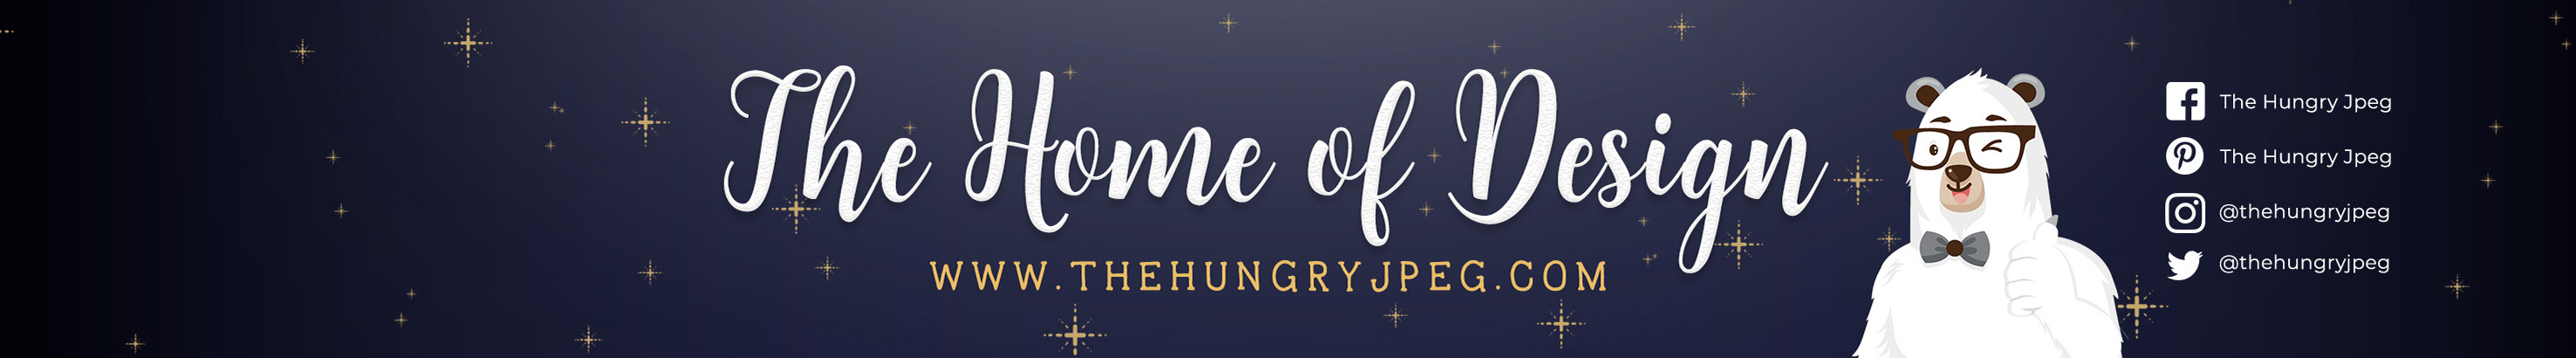 The Hungry JPEG.com's profile banner